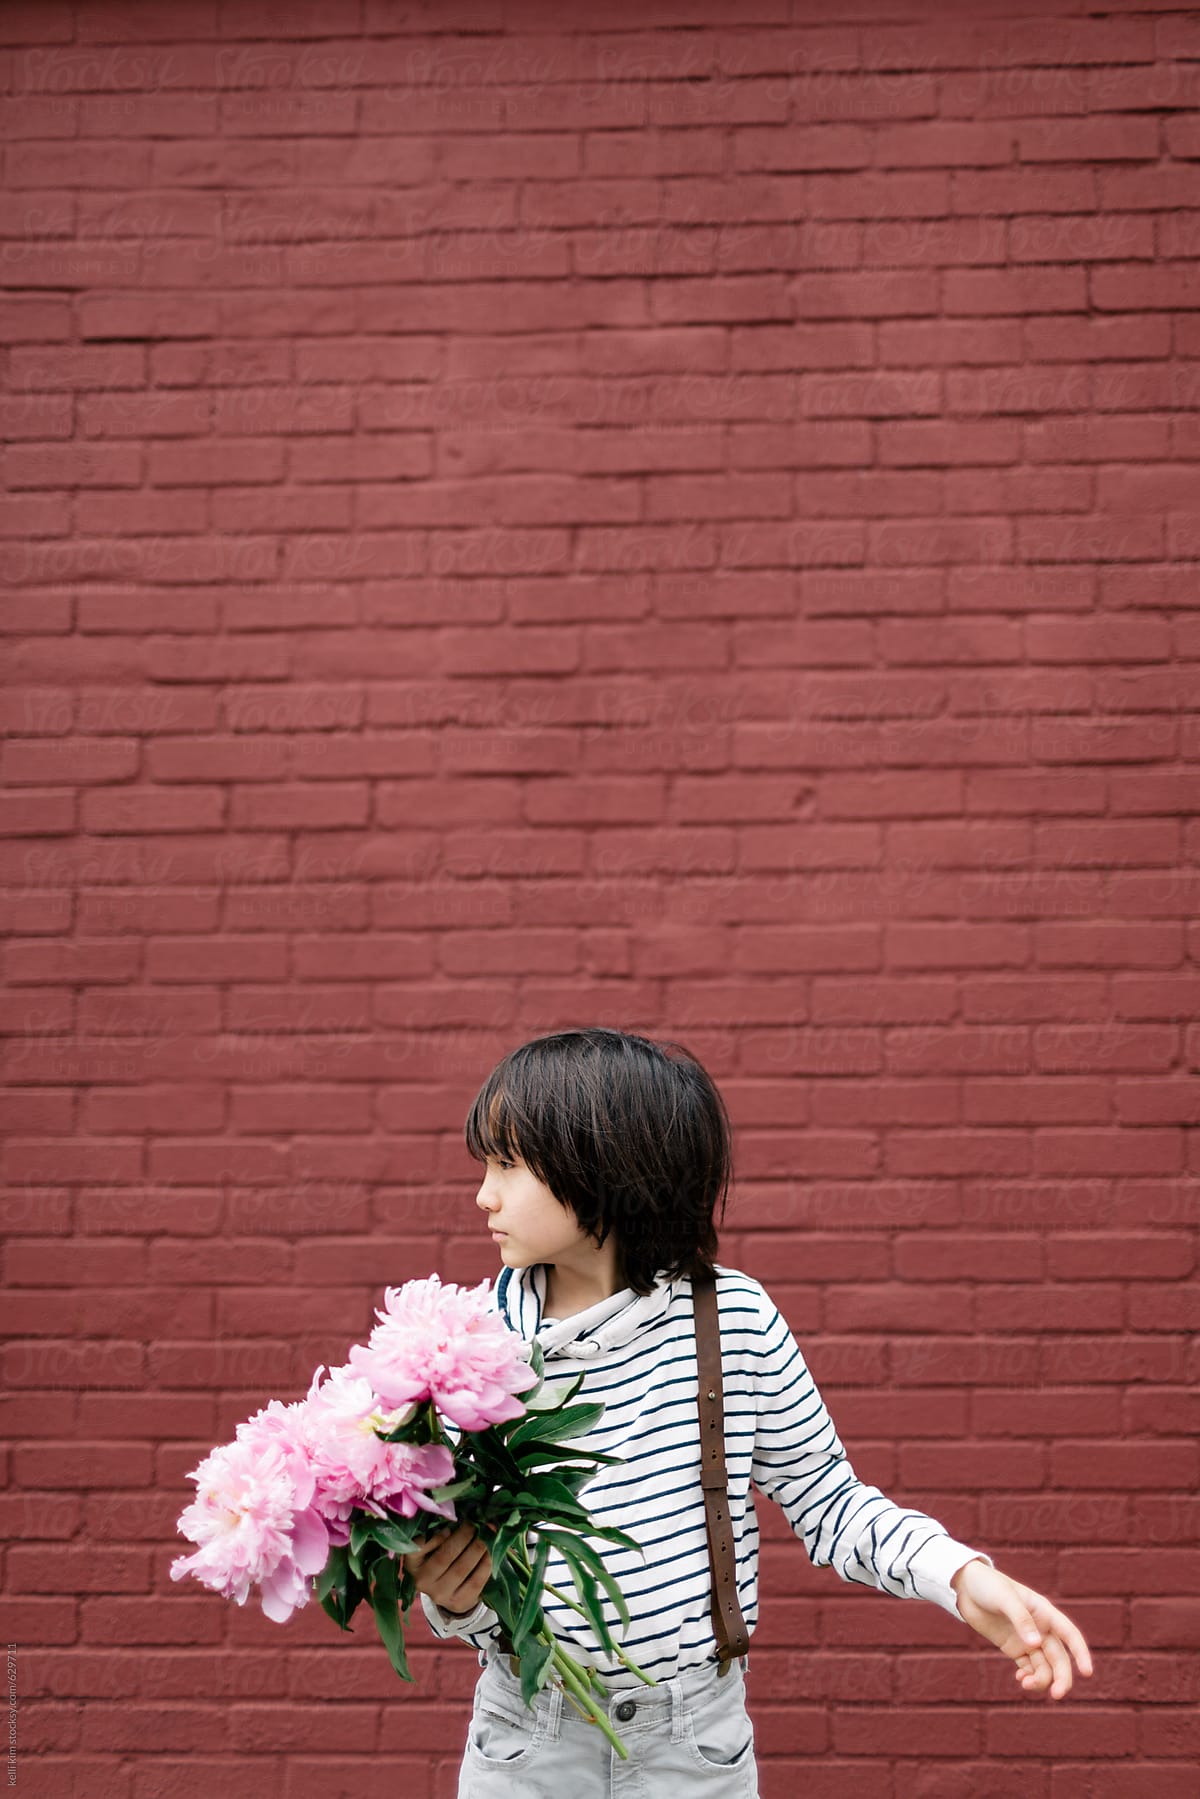 Cute mixed race boy holds pink flowers in front of brick wall